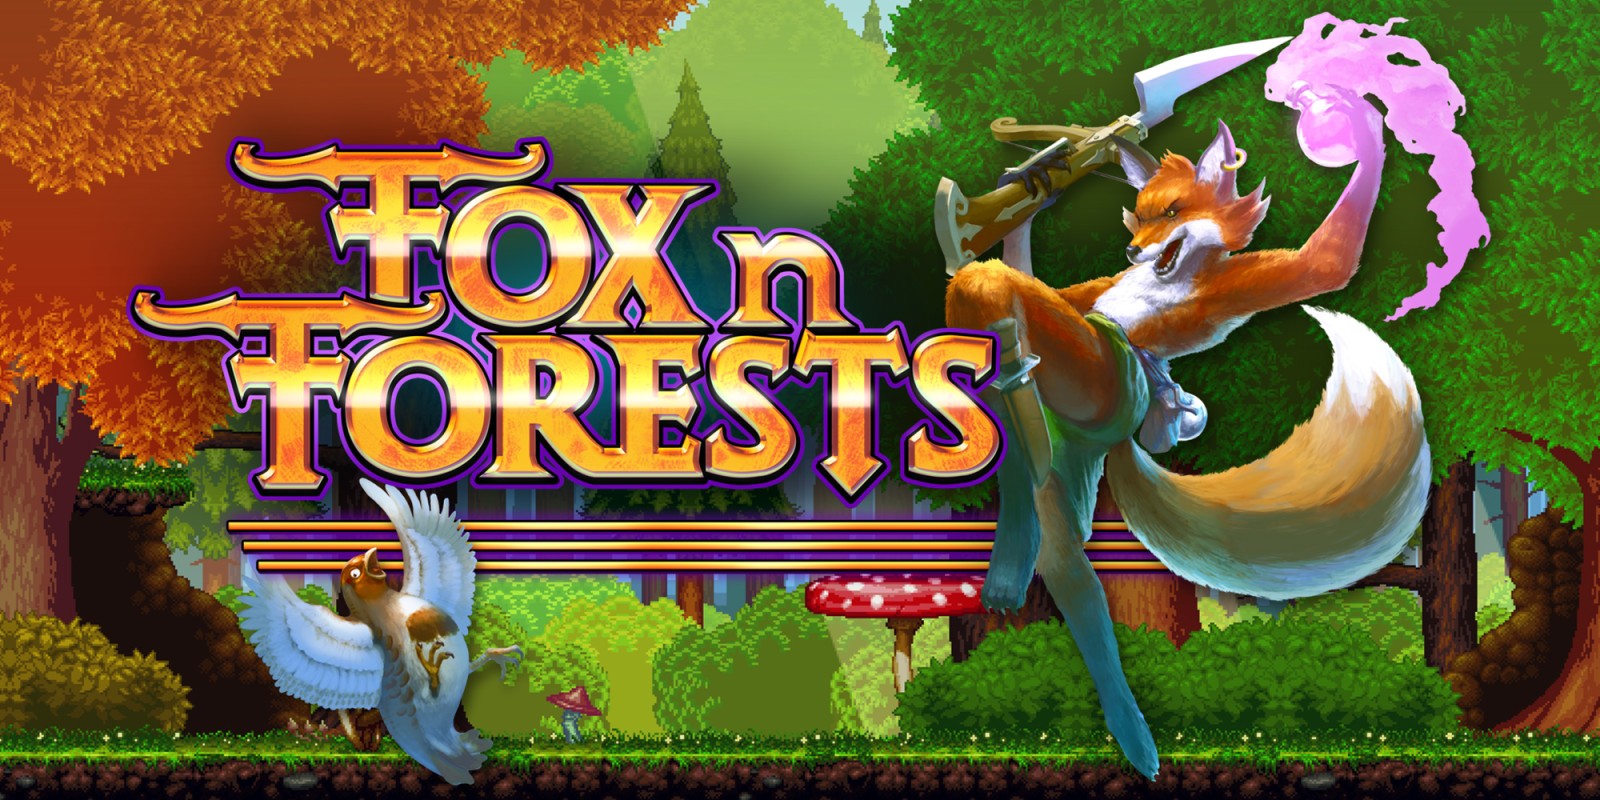 Foxy games free download